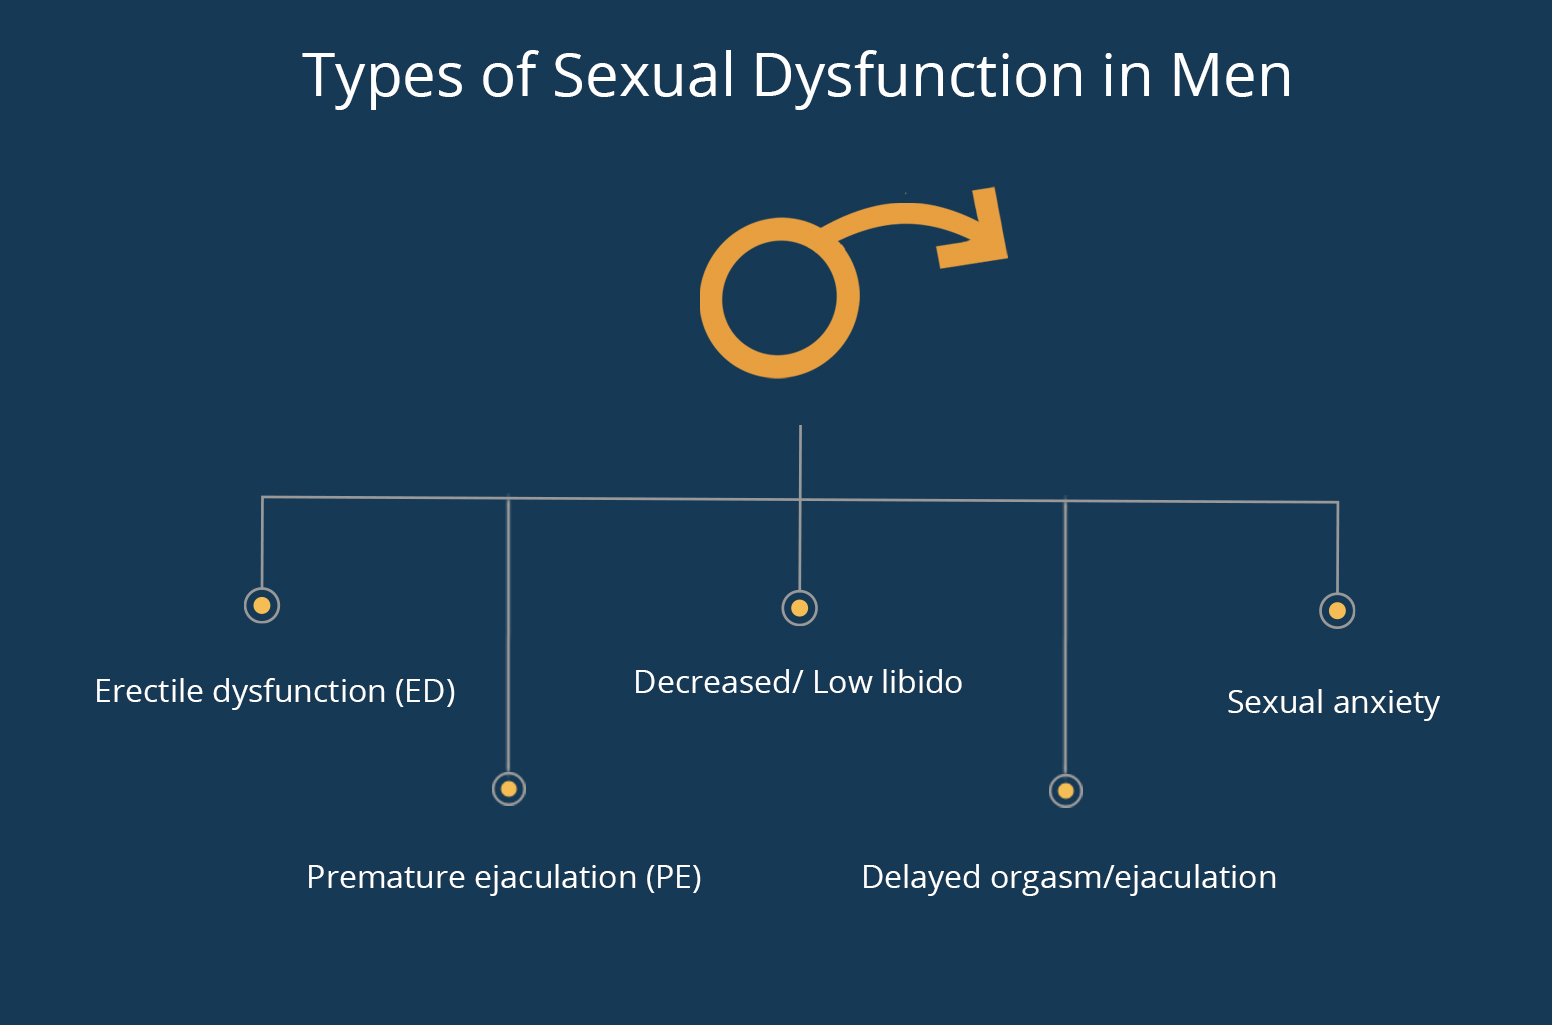 How Tcm And Western Treatments Can Help You Improve Sexual Dysfunction